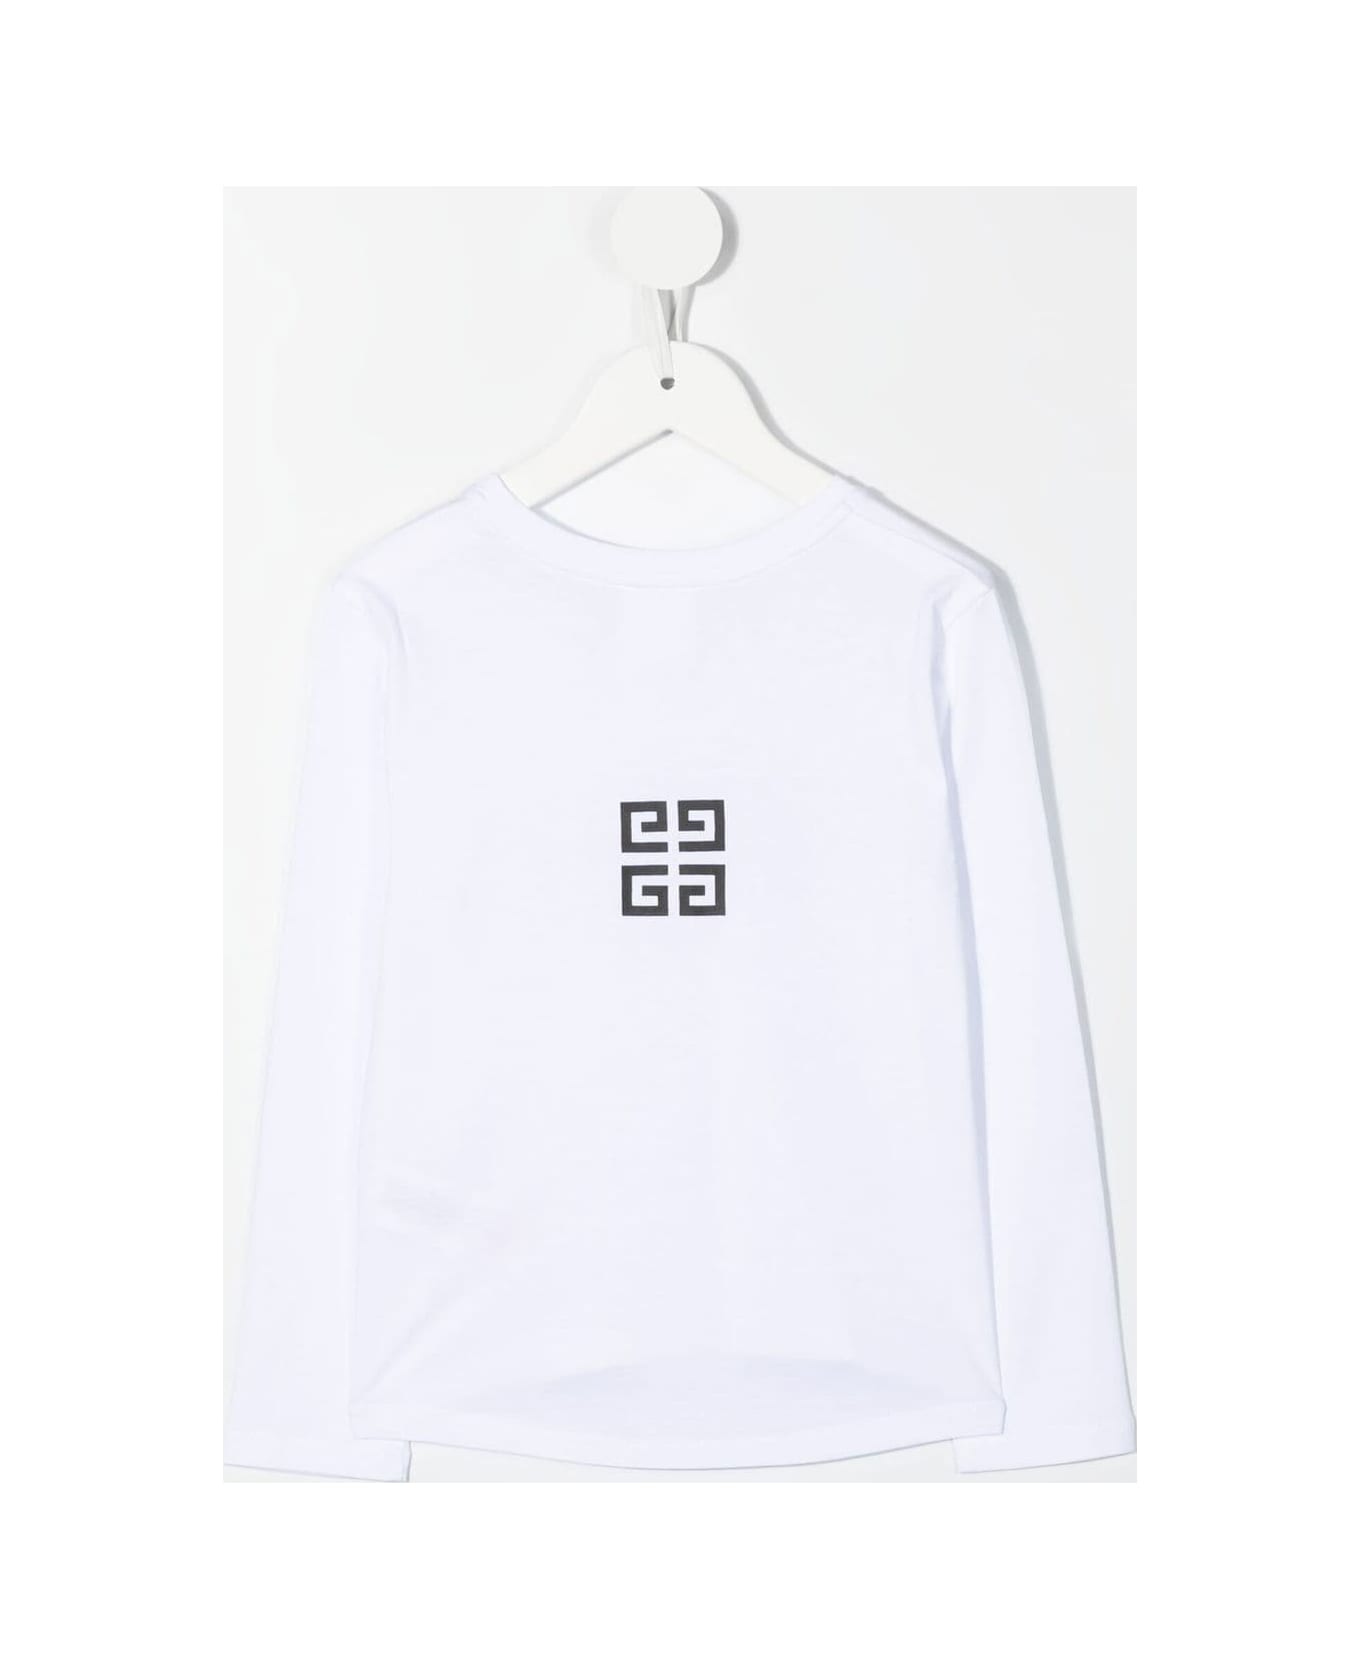 Givenchy Kids White Long Sleeve T-shirt With Signature And Logo - WHITE